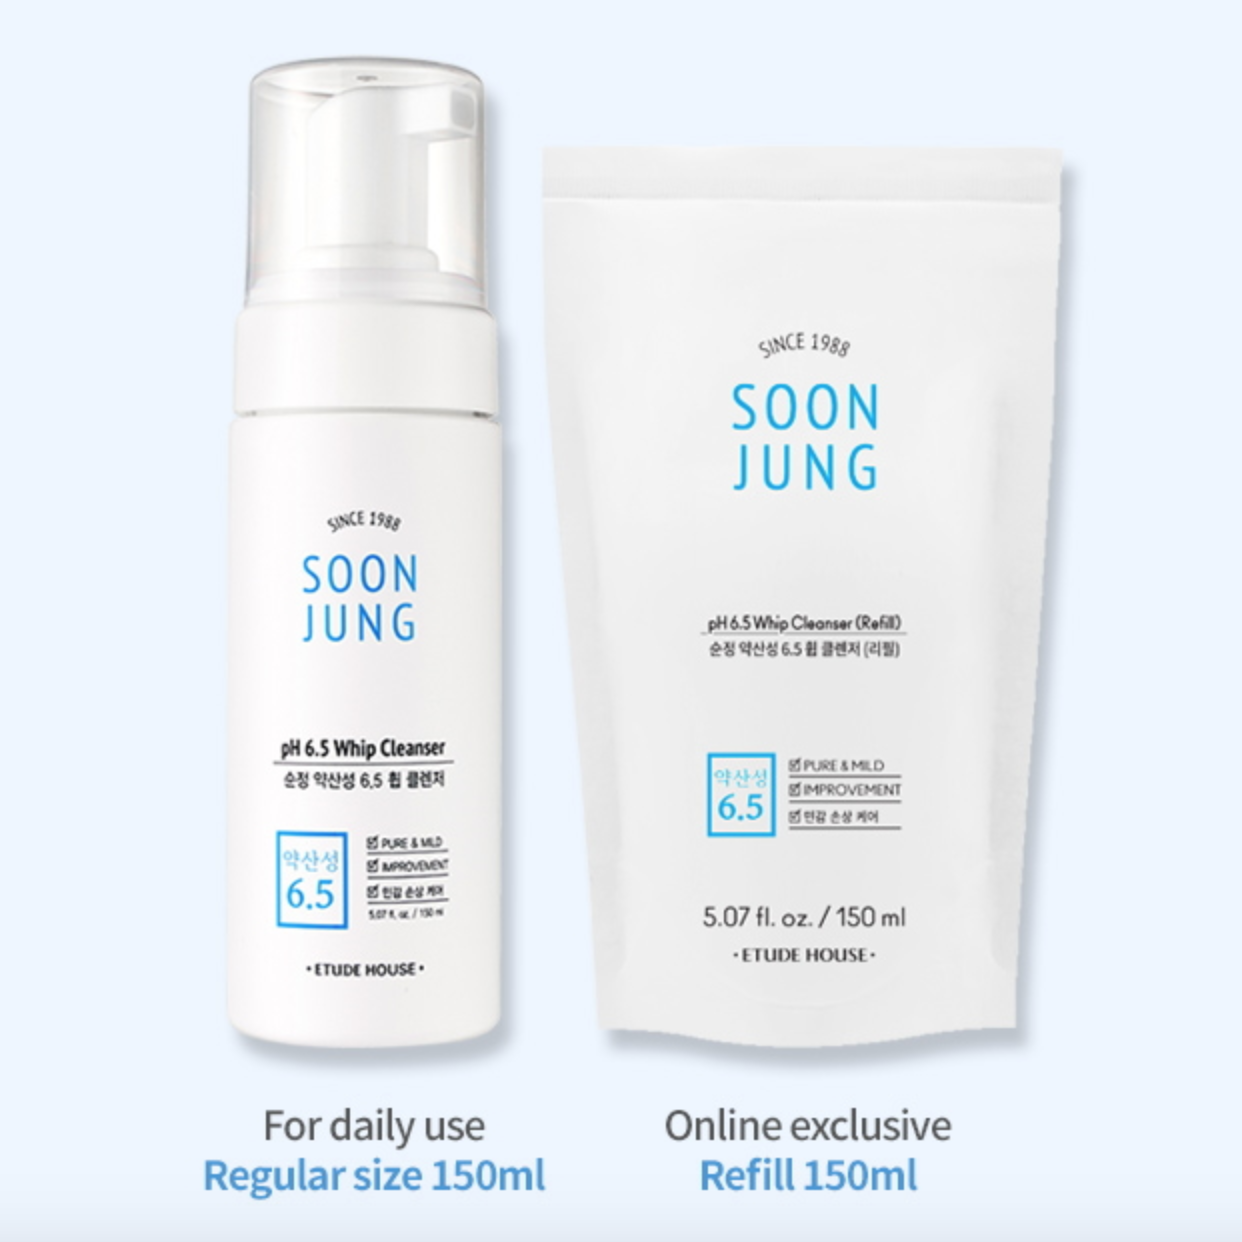 SOON JUNG pH 6.5 Whip Cleanser - BASIC MADE CO